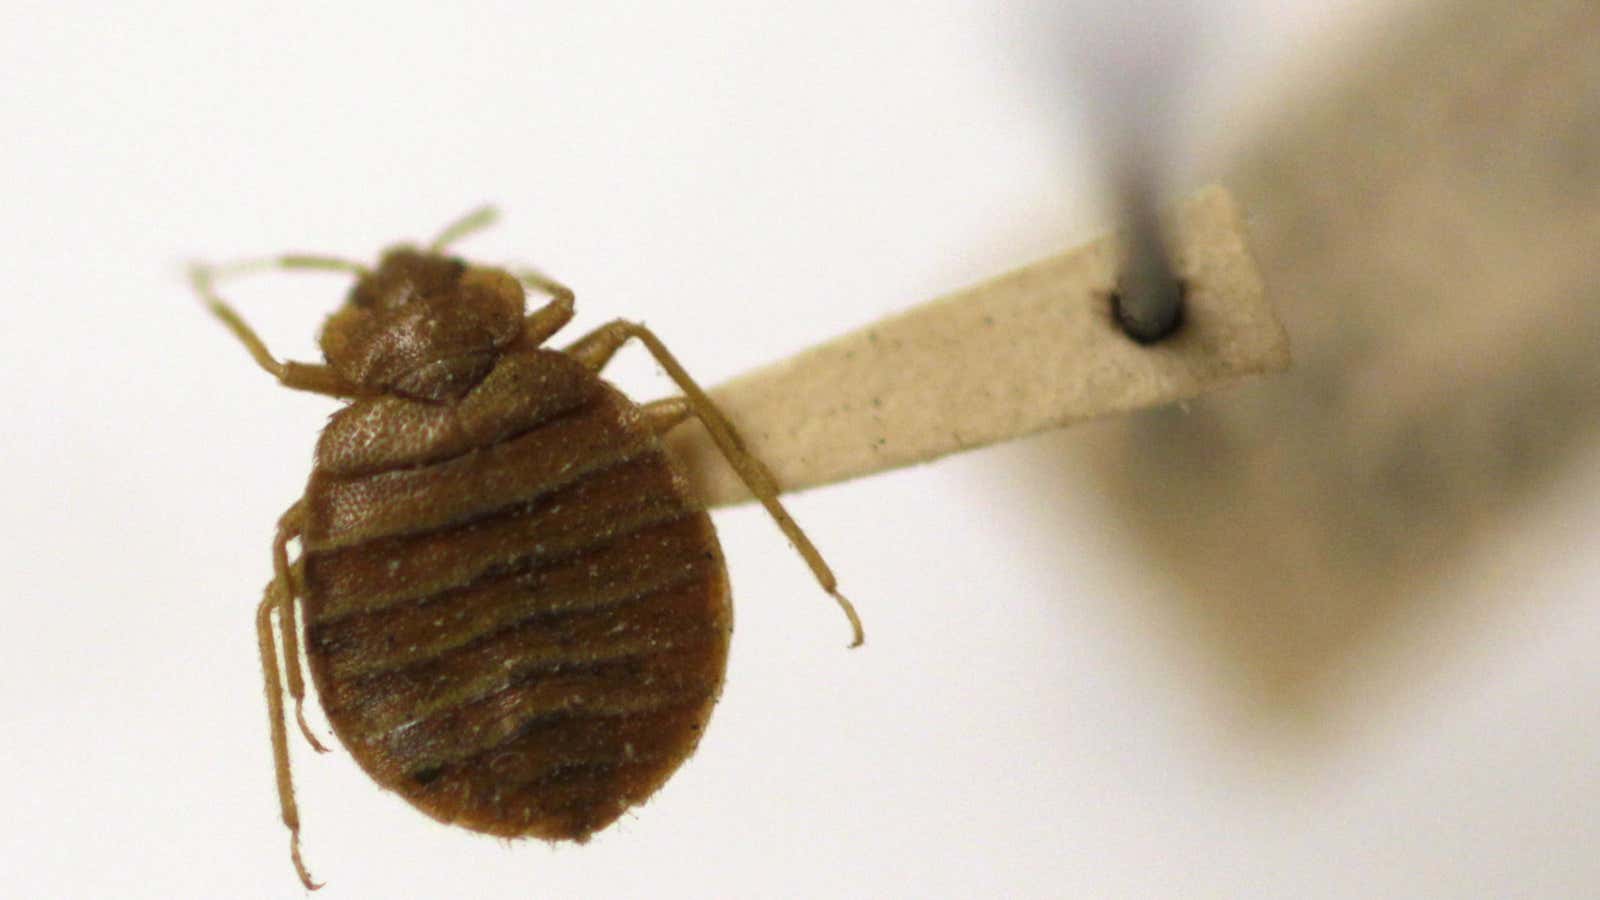 The best bed bugs are dead bed bugs.